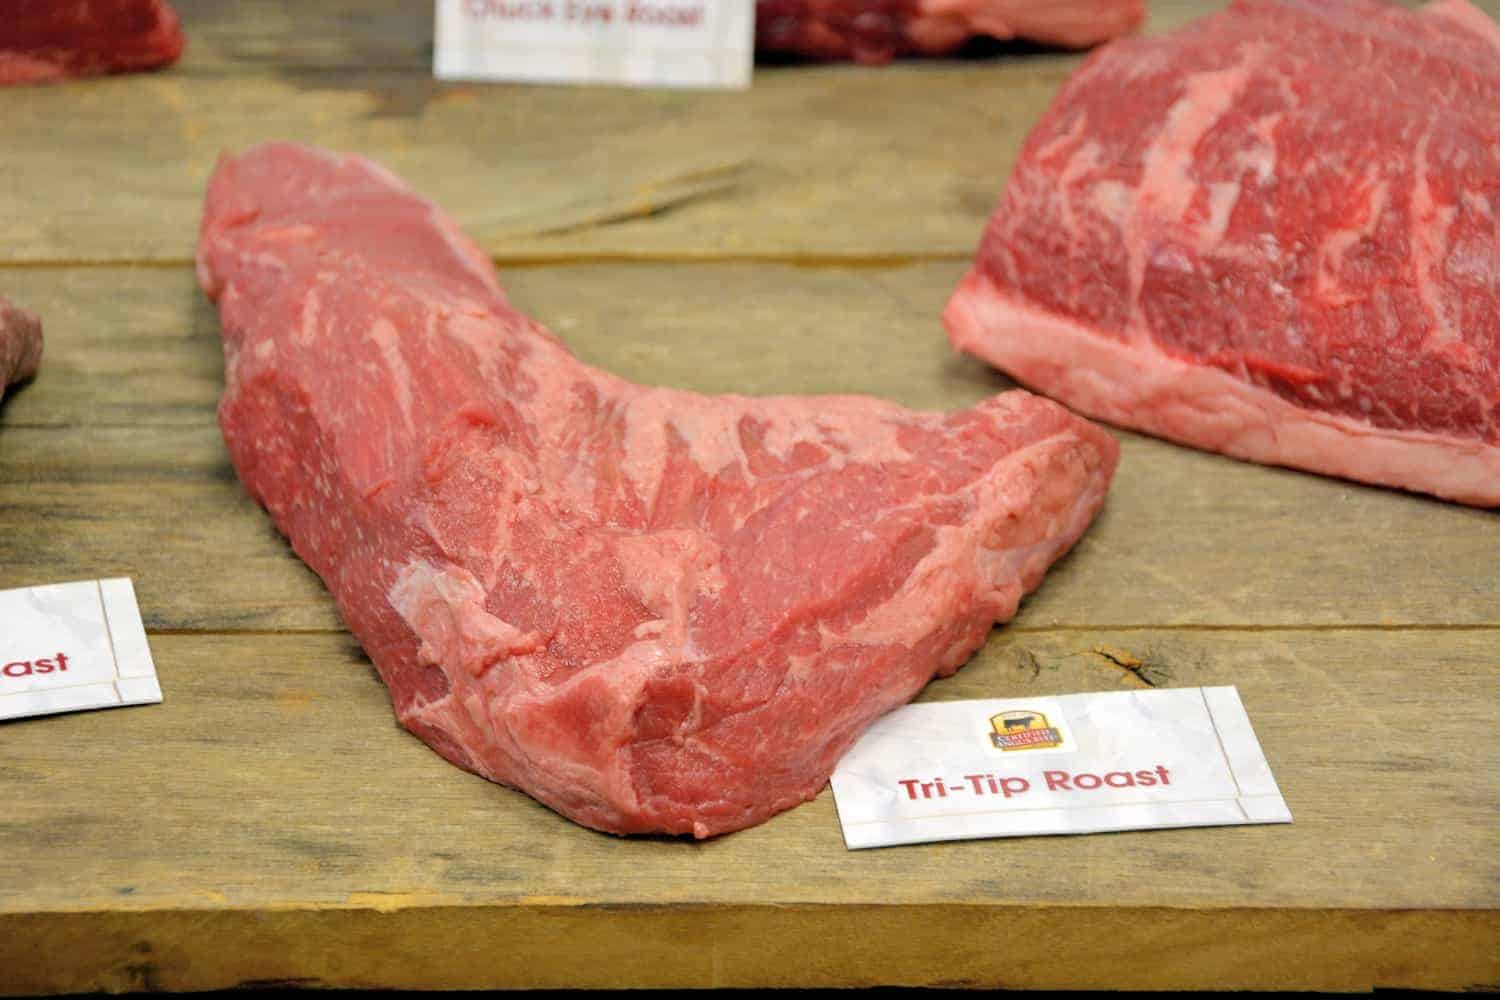 Which is better tri-tip or top sirloin? - Foodly